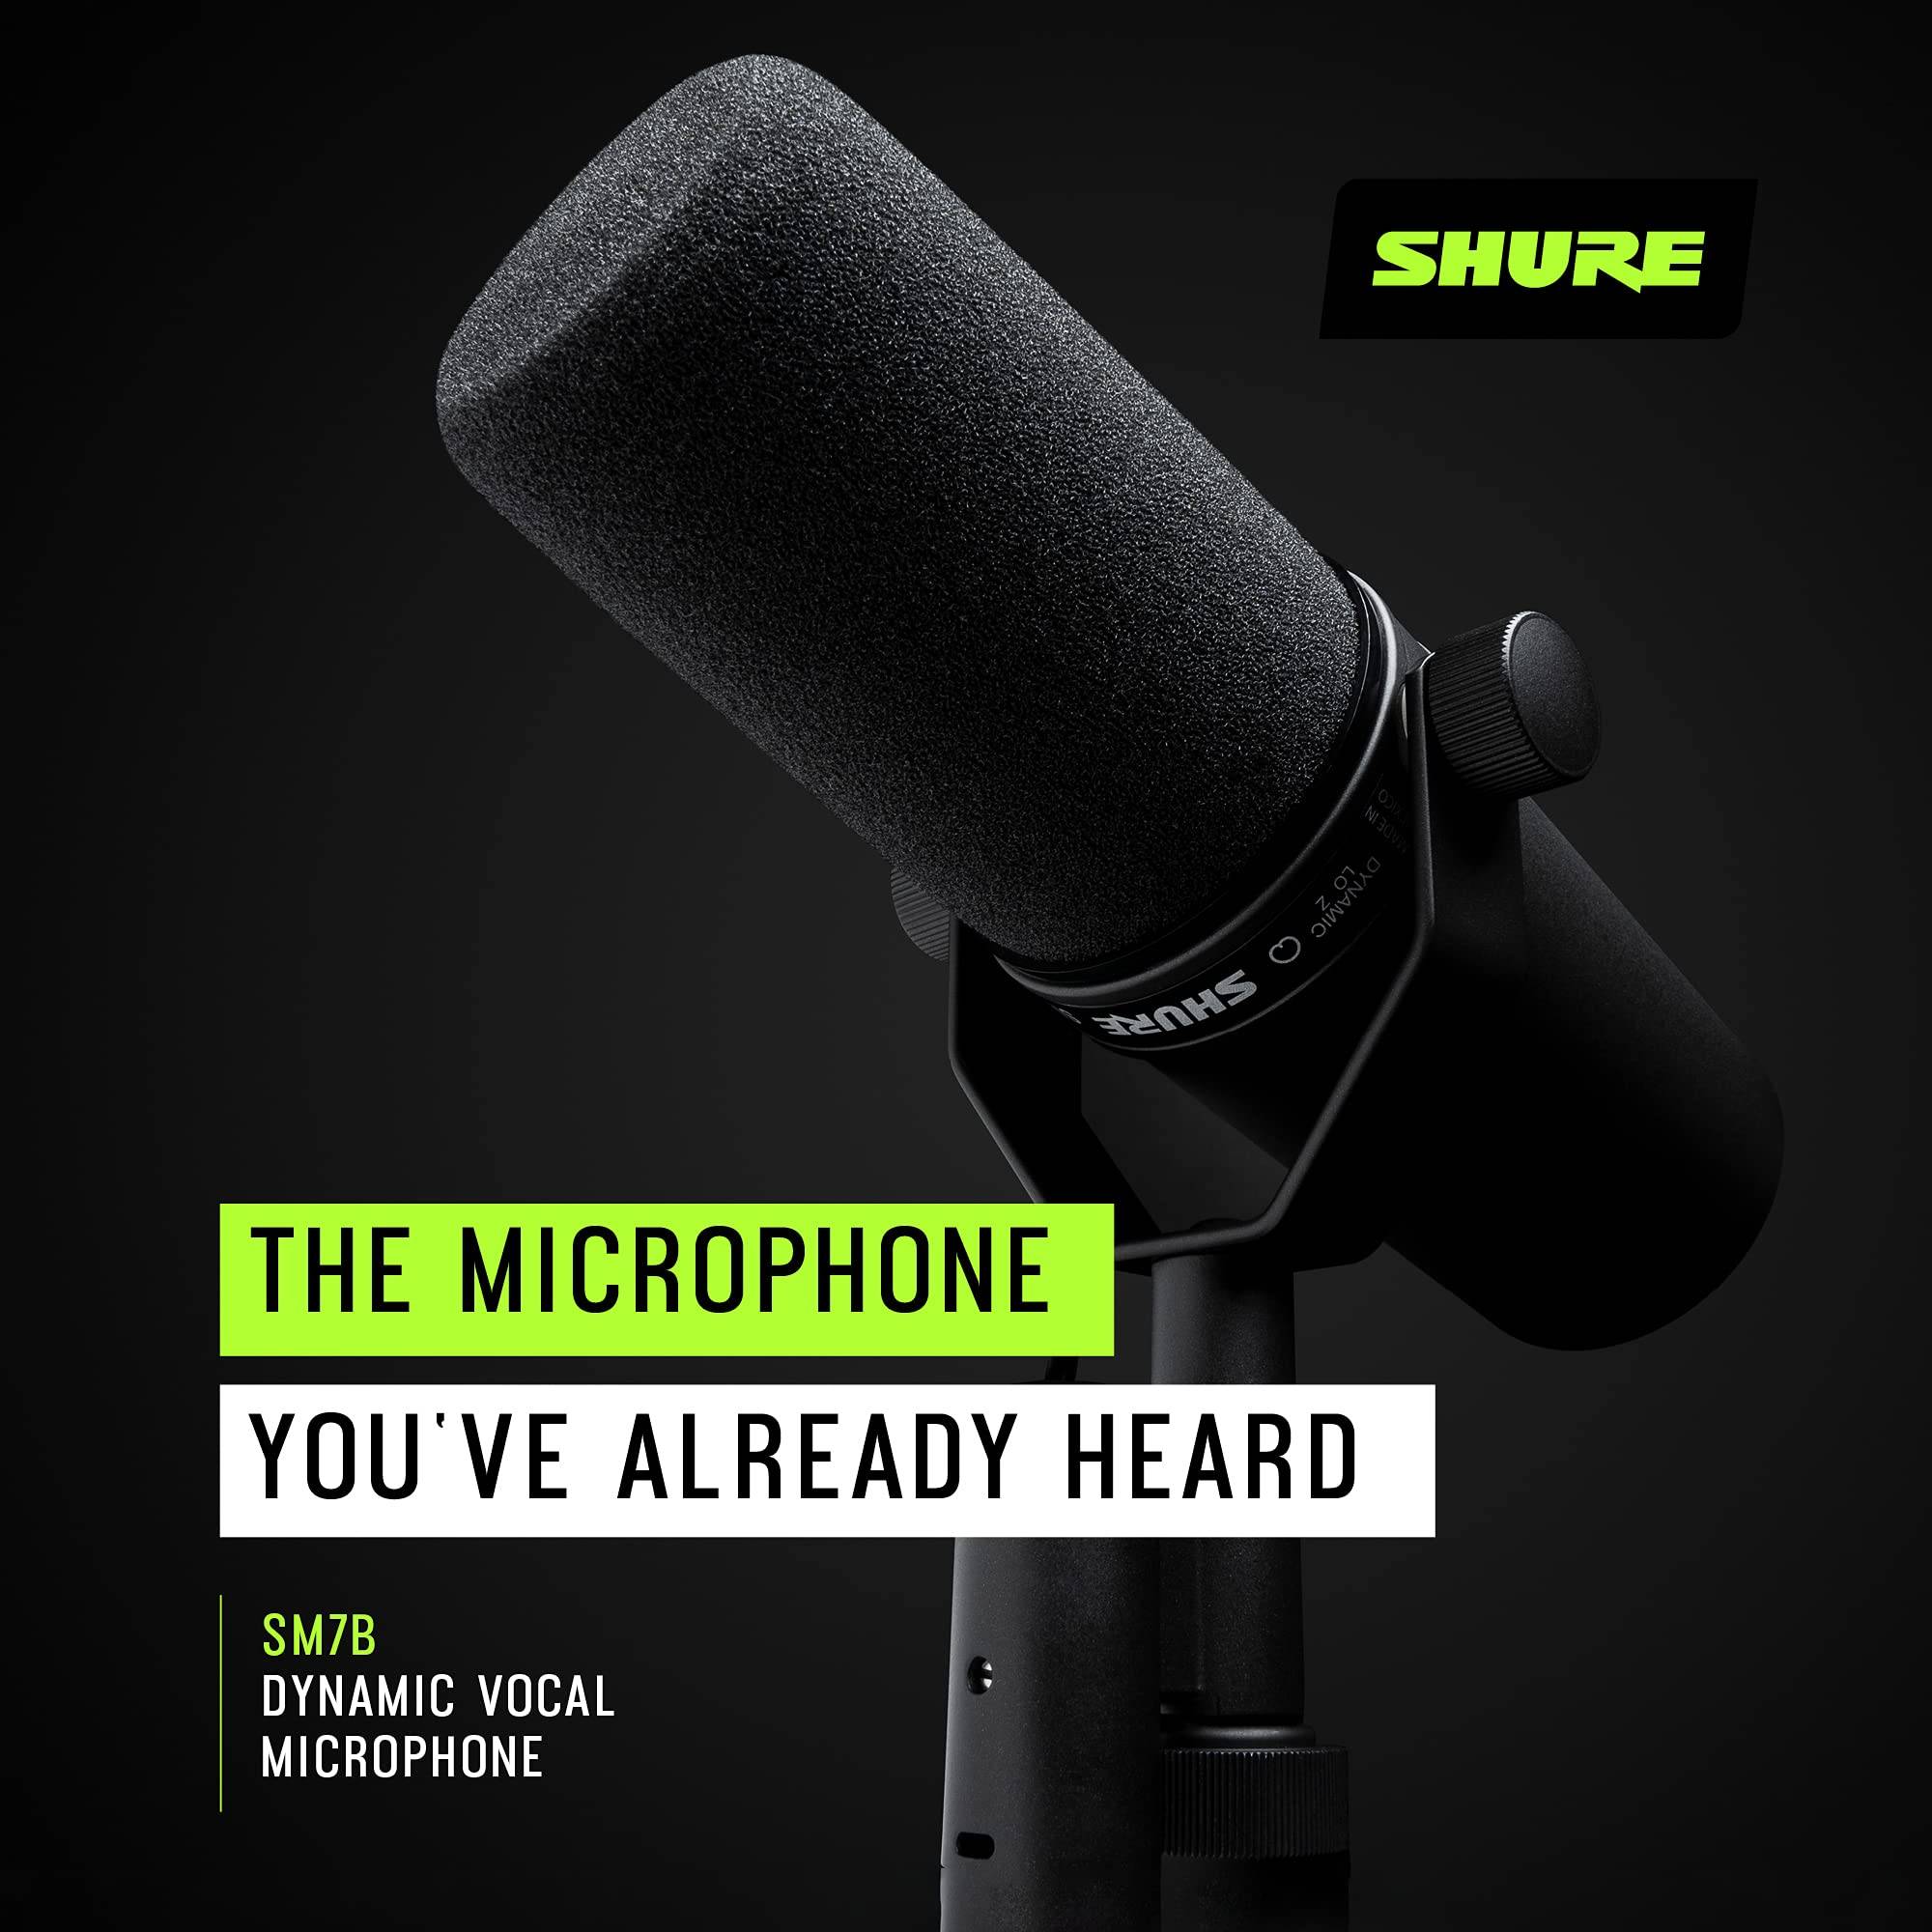 Shure SM7B is Your Key to Professional Audio